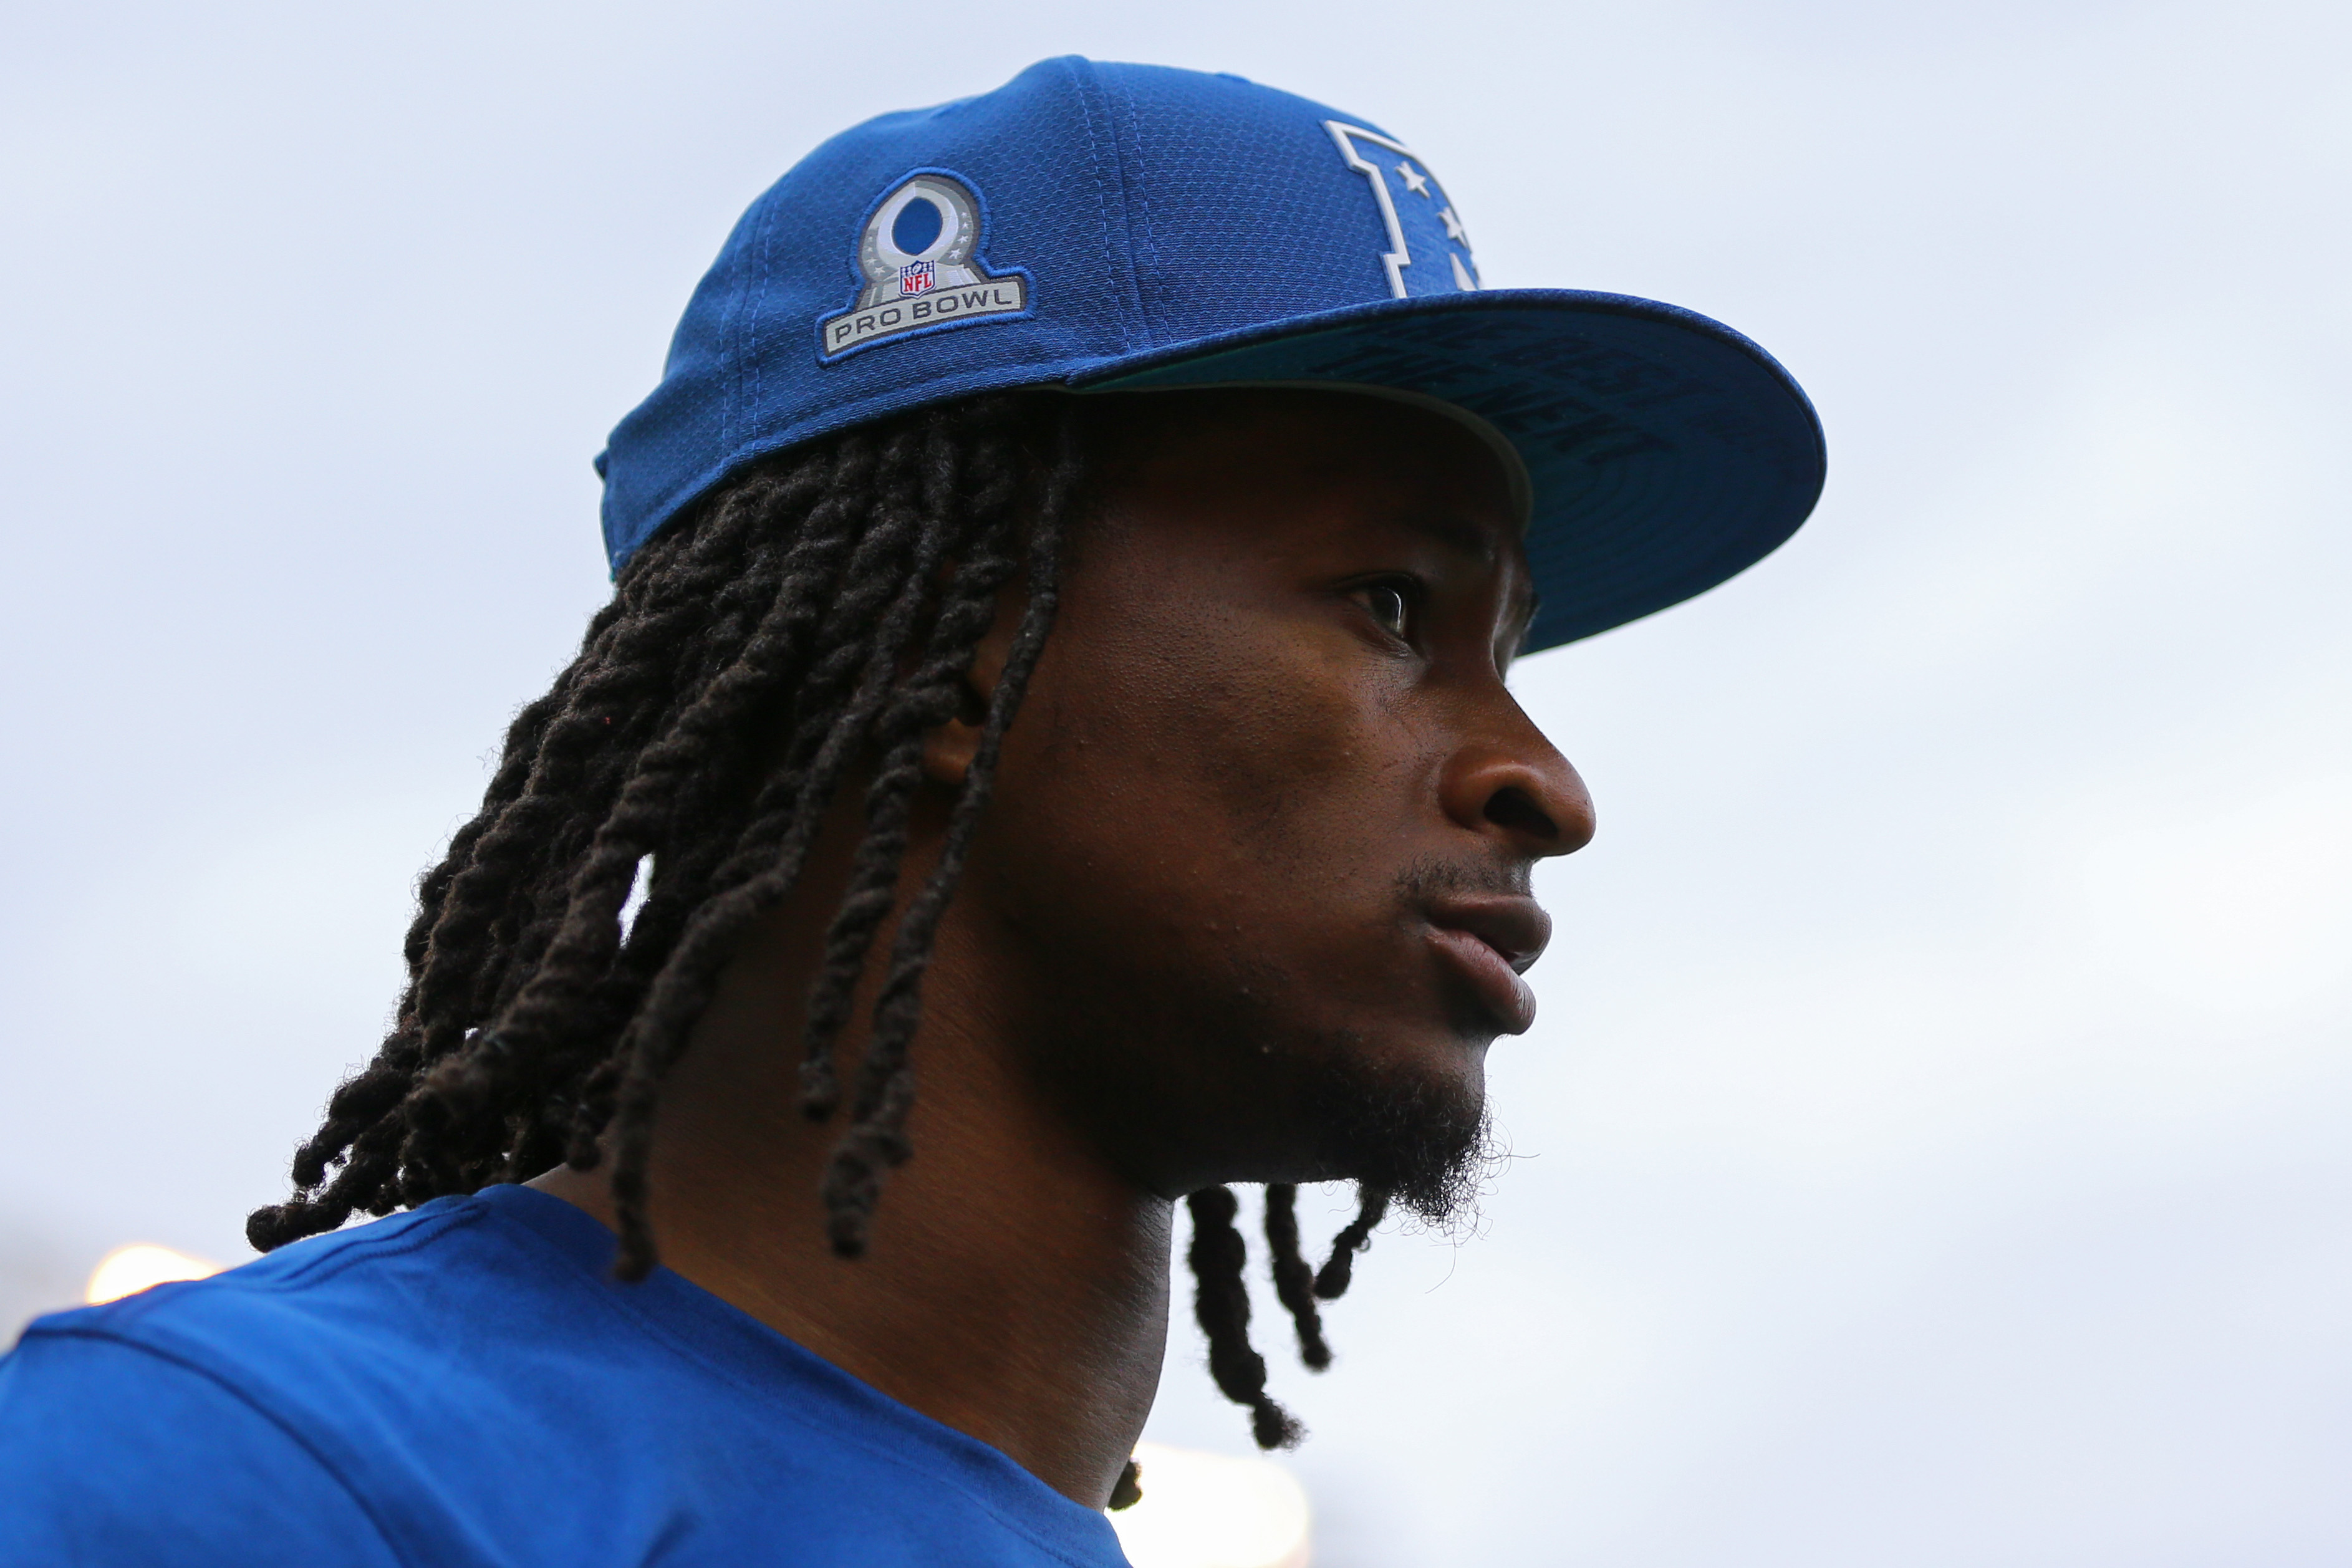 Los Angeles Rams RB Todd Gurley signs autographs before the 2018 NFL Pro Bowl in Orlando, January 28, 2018.